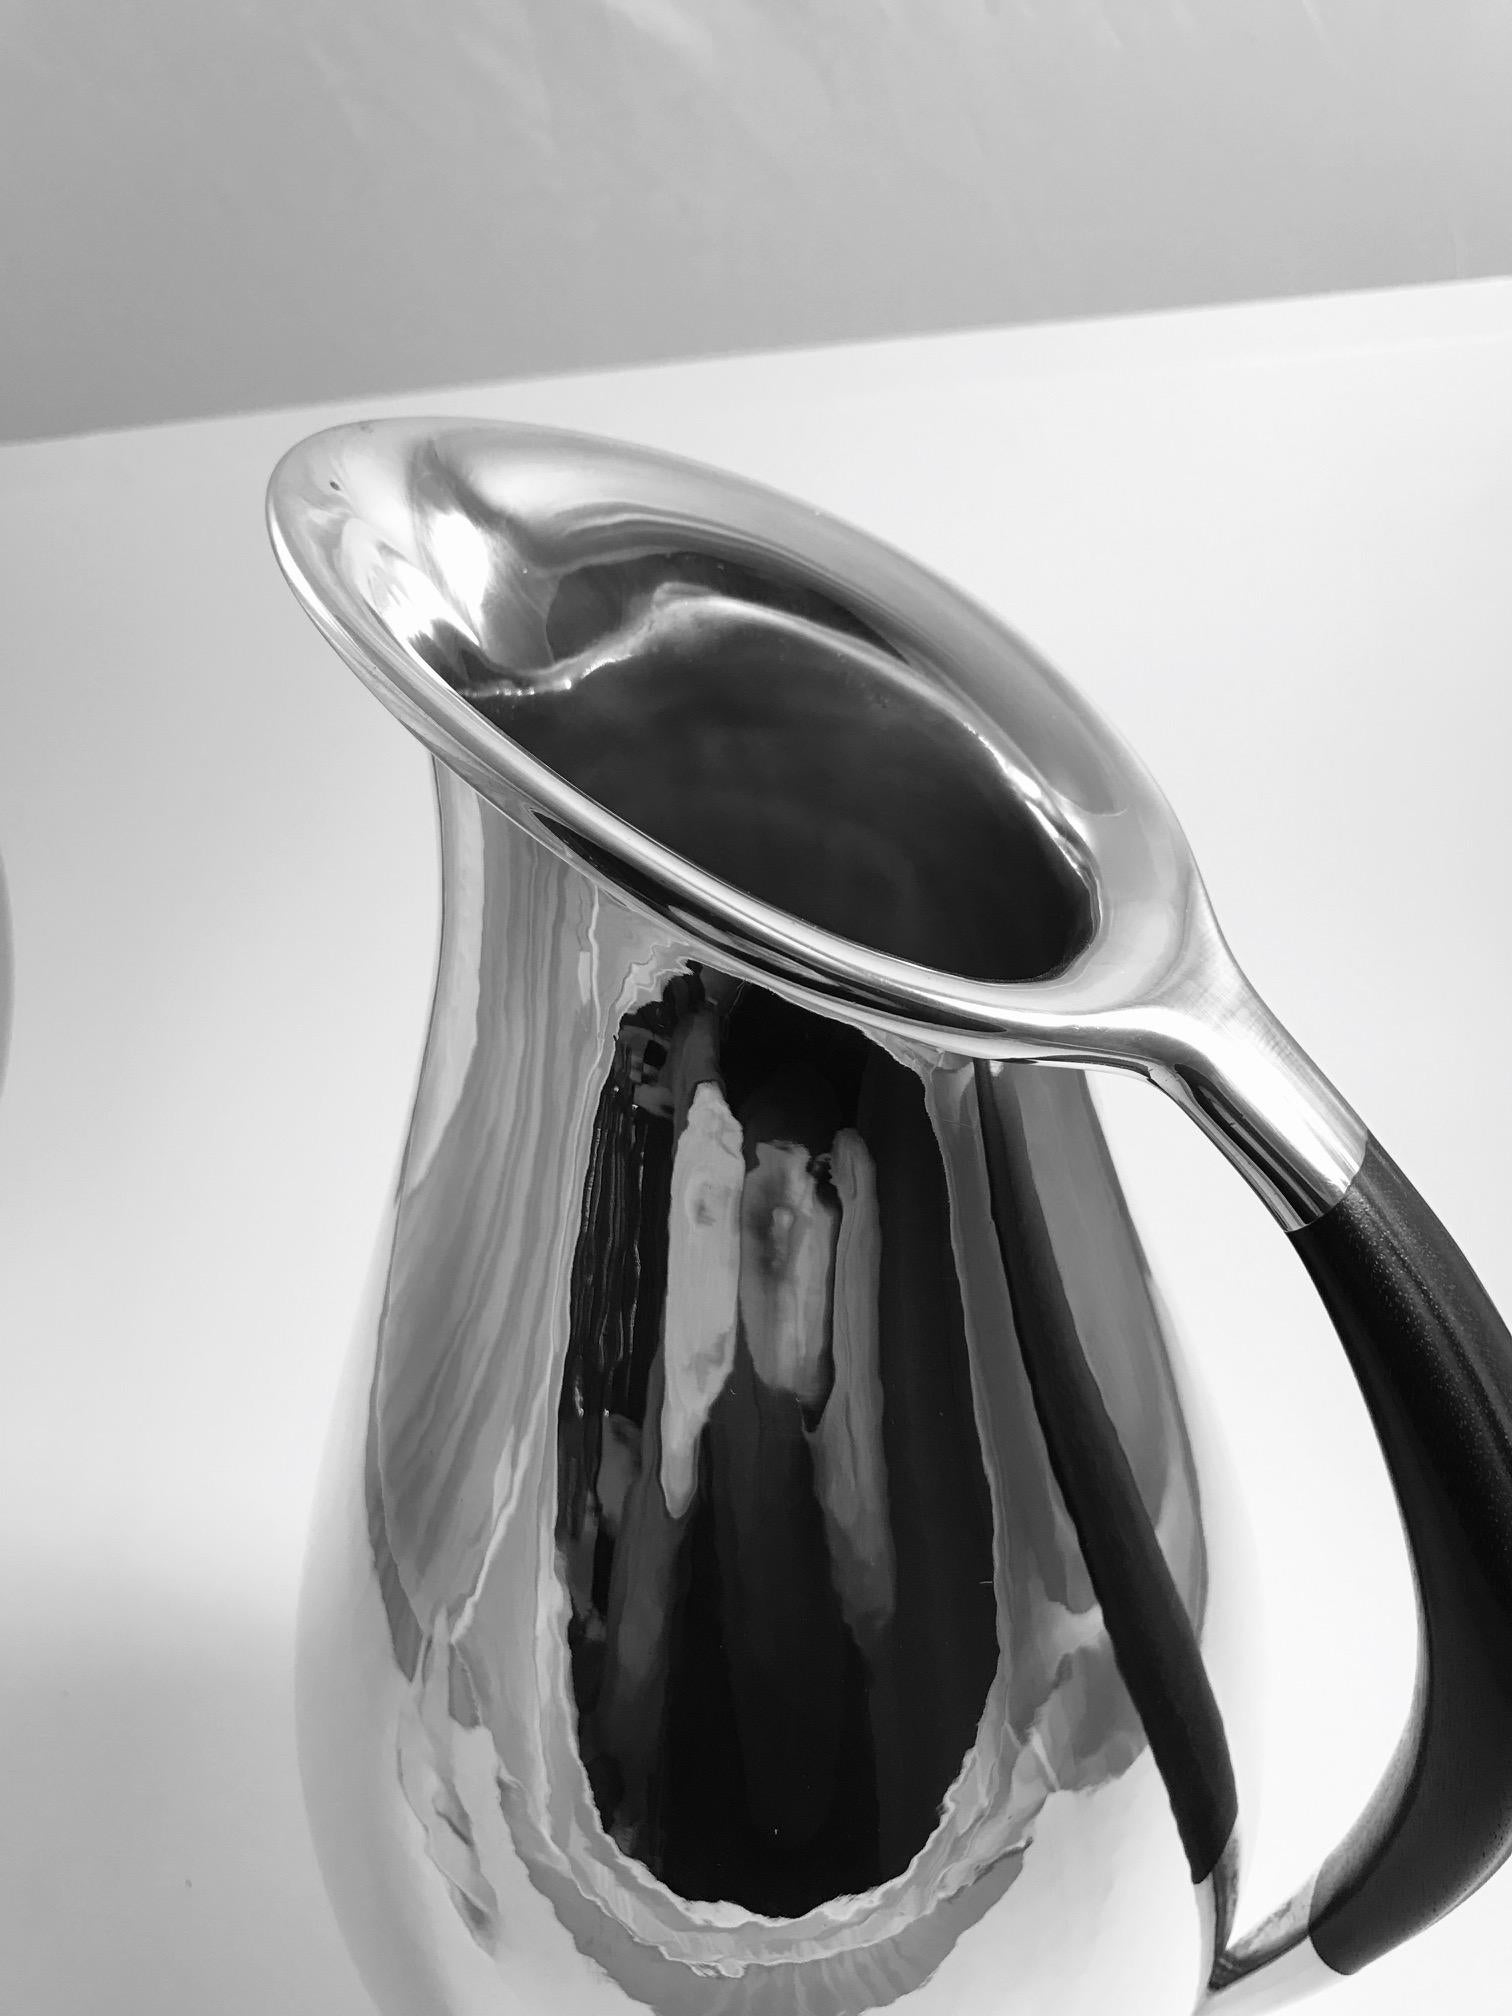 Ths is a Georg Jensen sterling silver pitcher with ebony handle, design #432E by Johan Rohde from 1920.
This design for Rohde was the topic of many conversations between him and Georg Jensen, as its minimalistic look in 1920 was before its time,